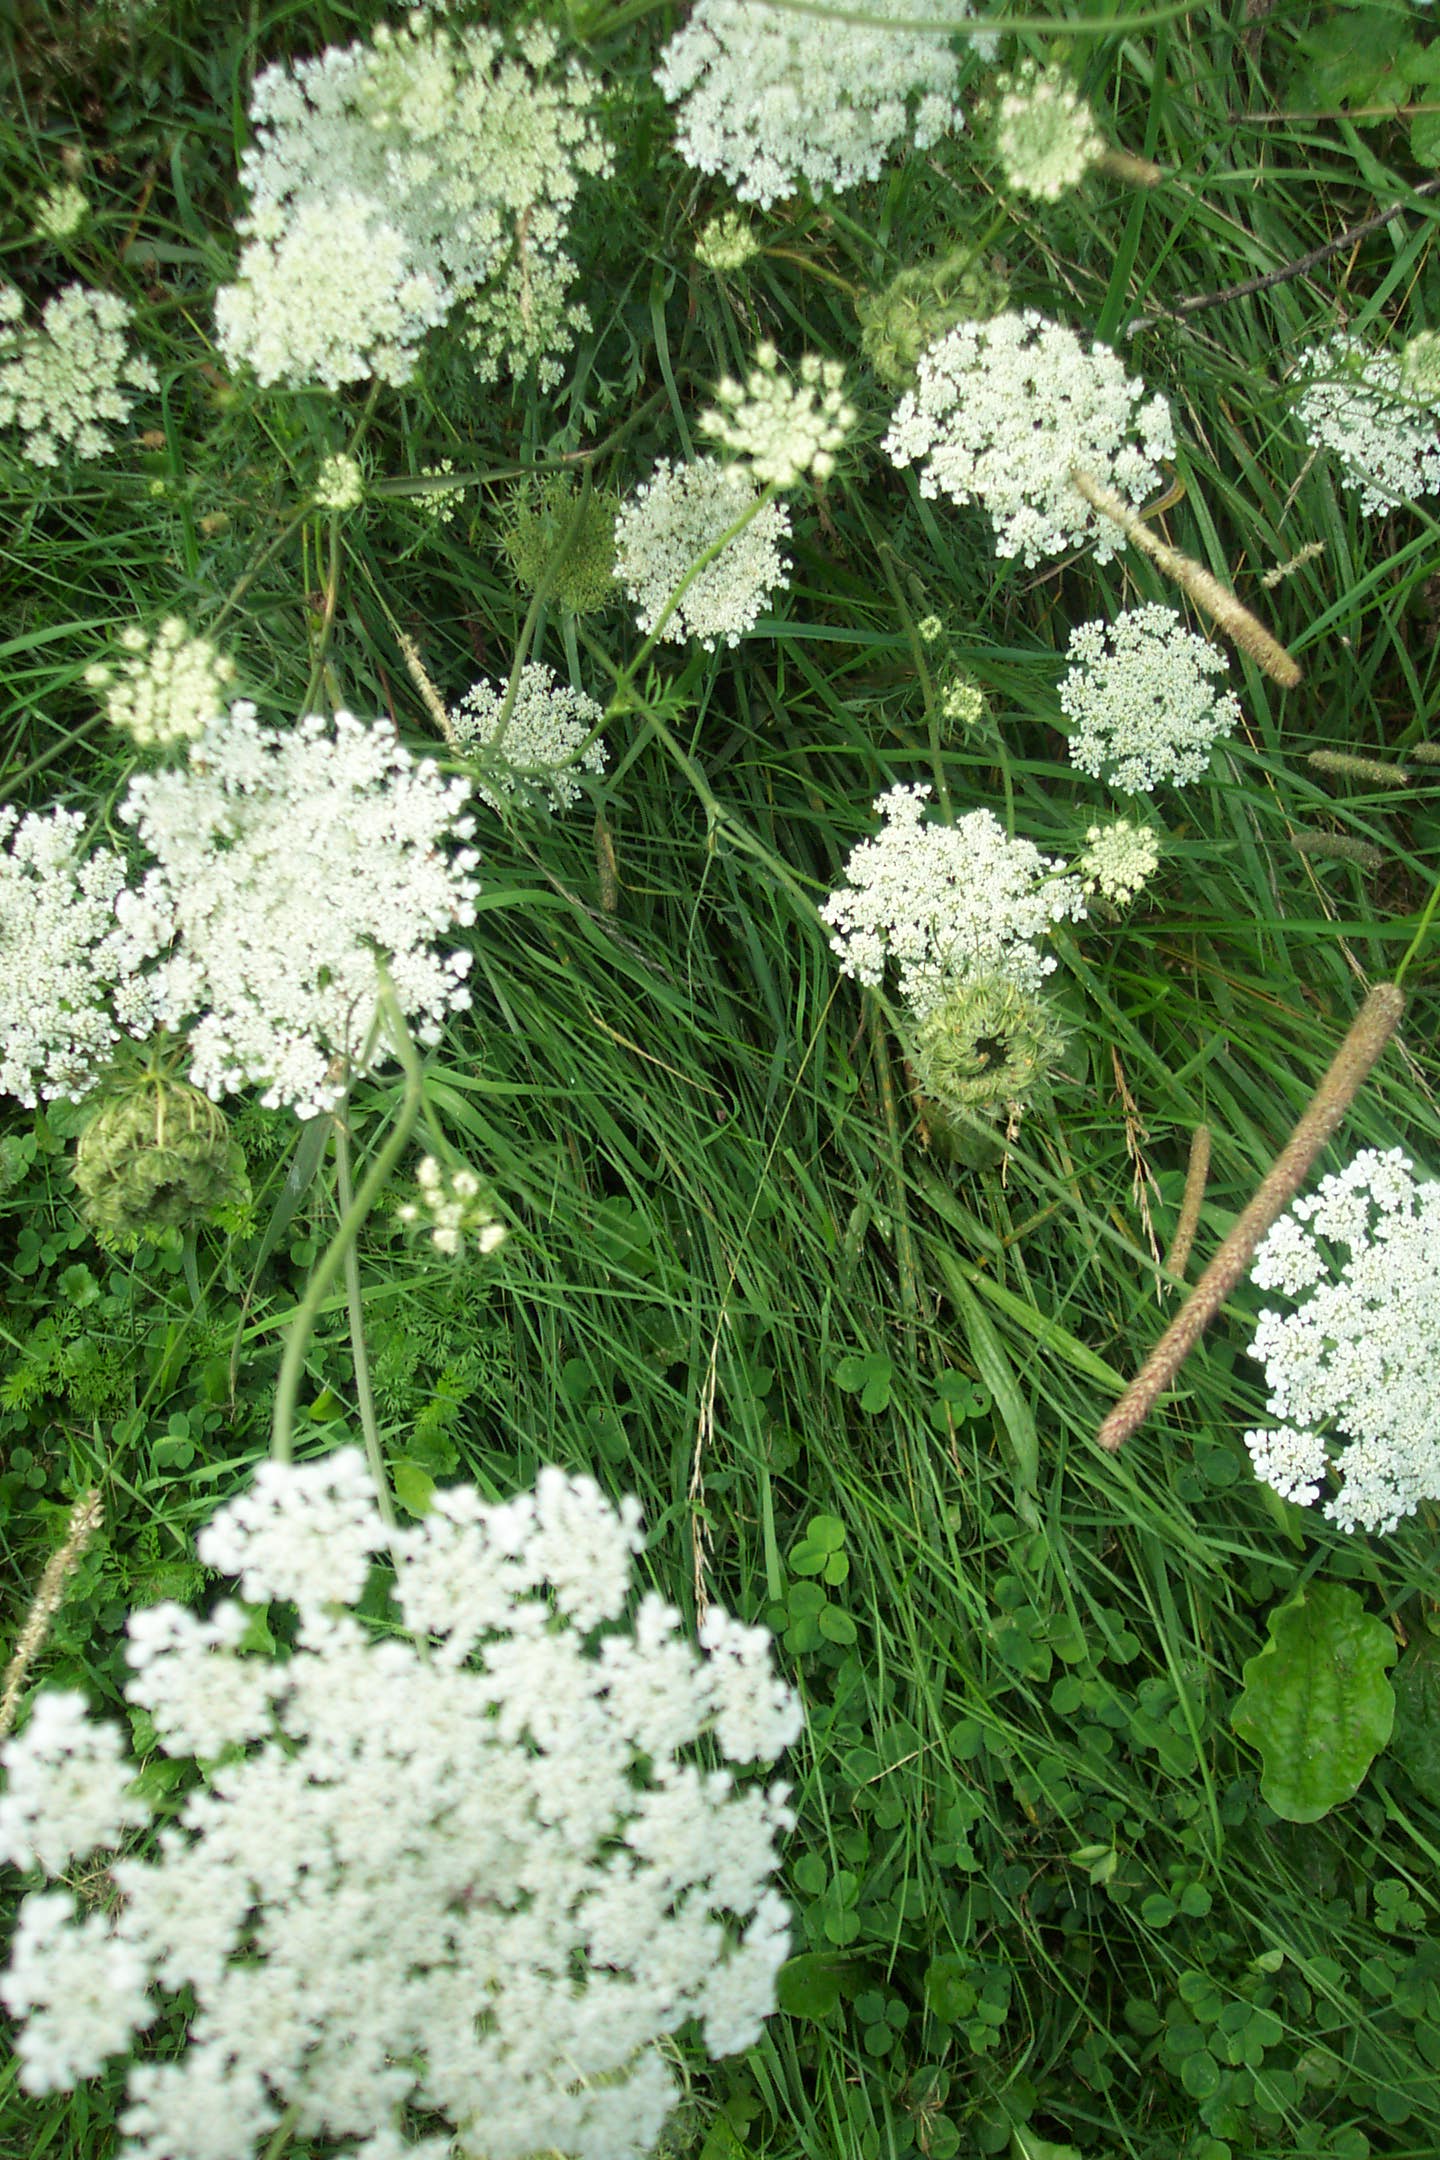 a couple of white flowers that are on some grass